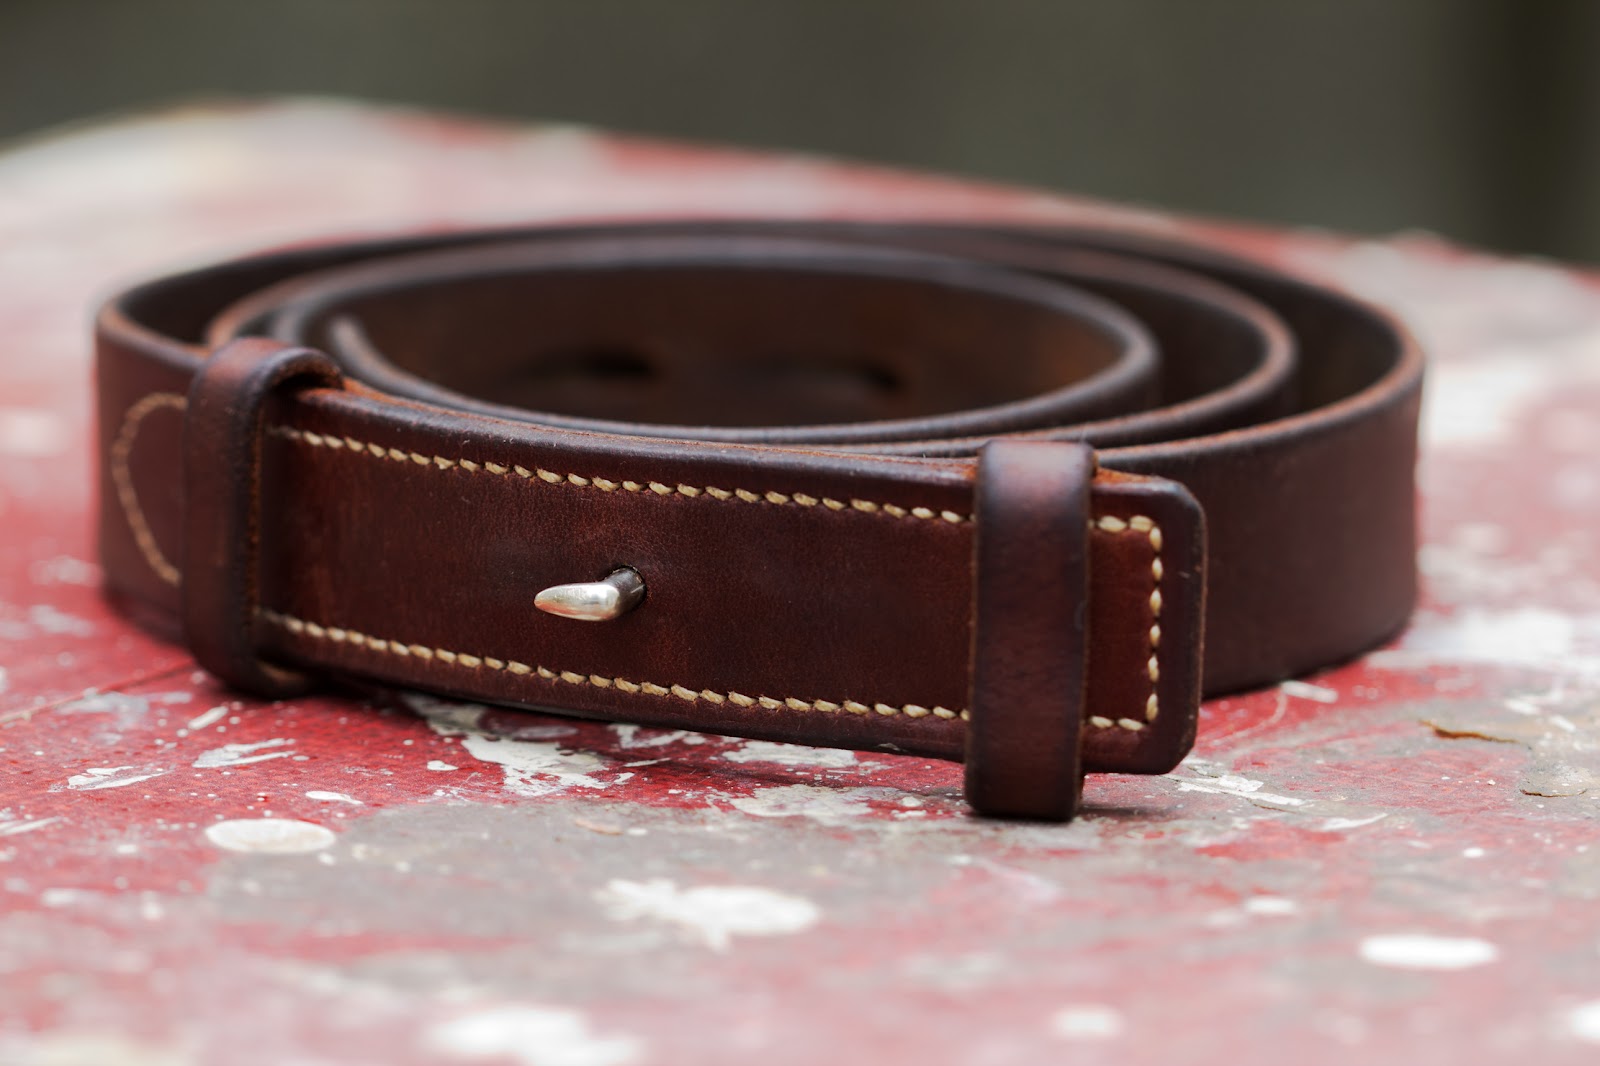 After the Denim: Dahlman Architect Belt - Before and After